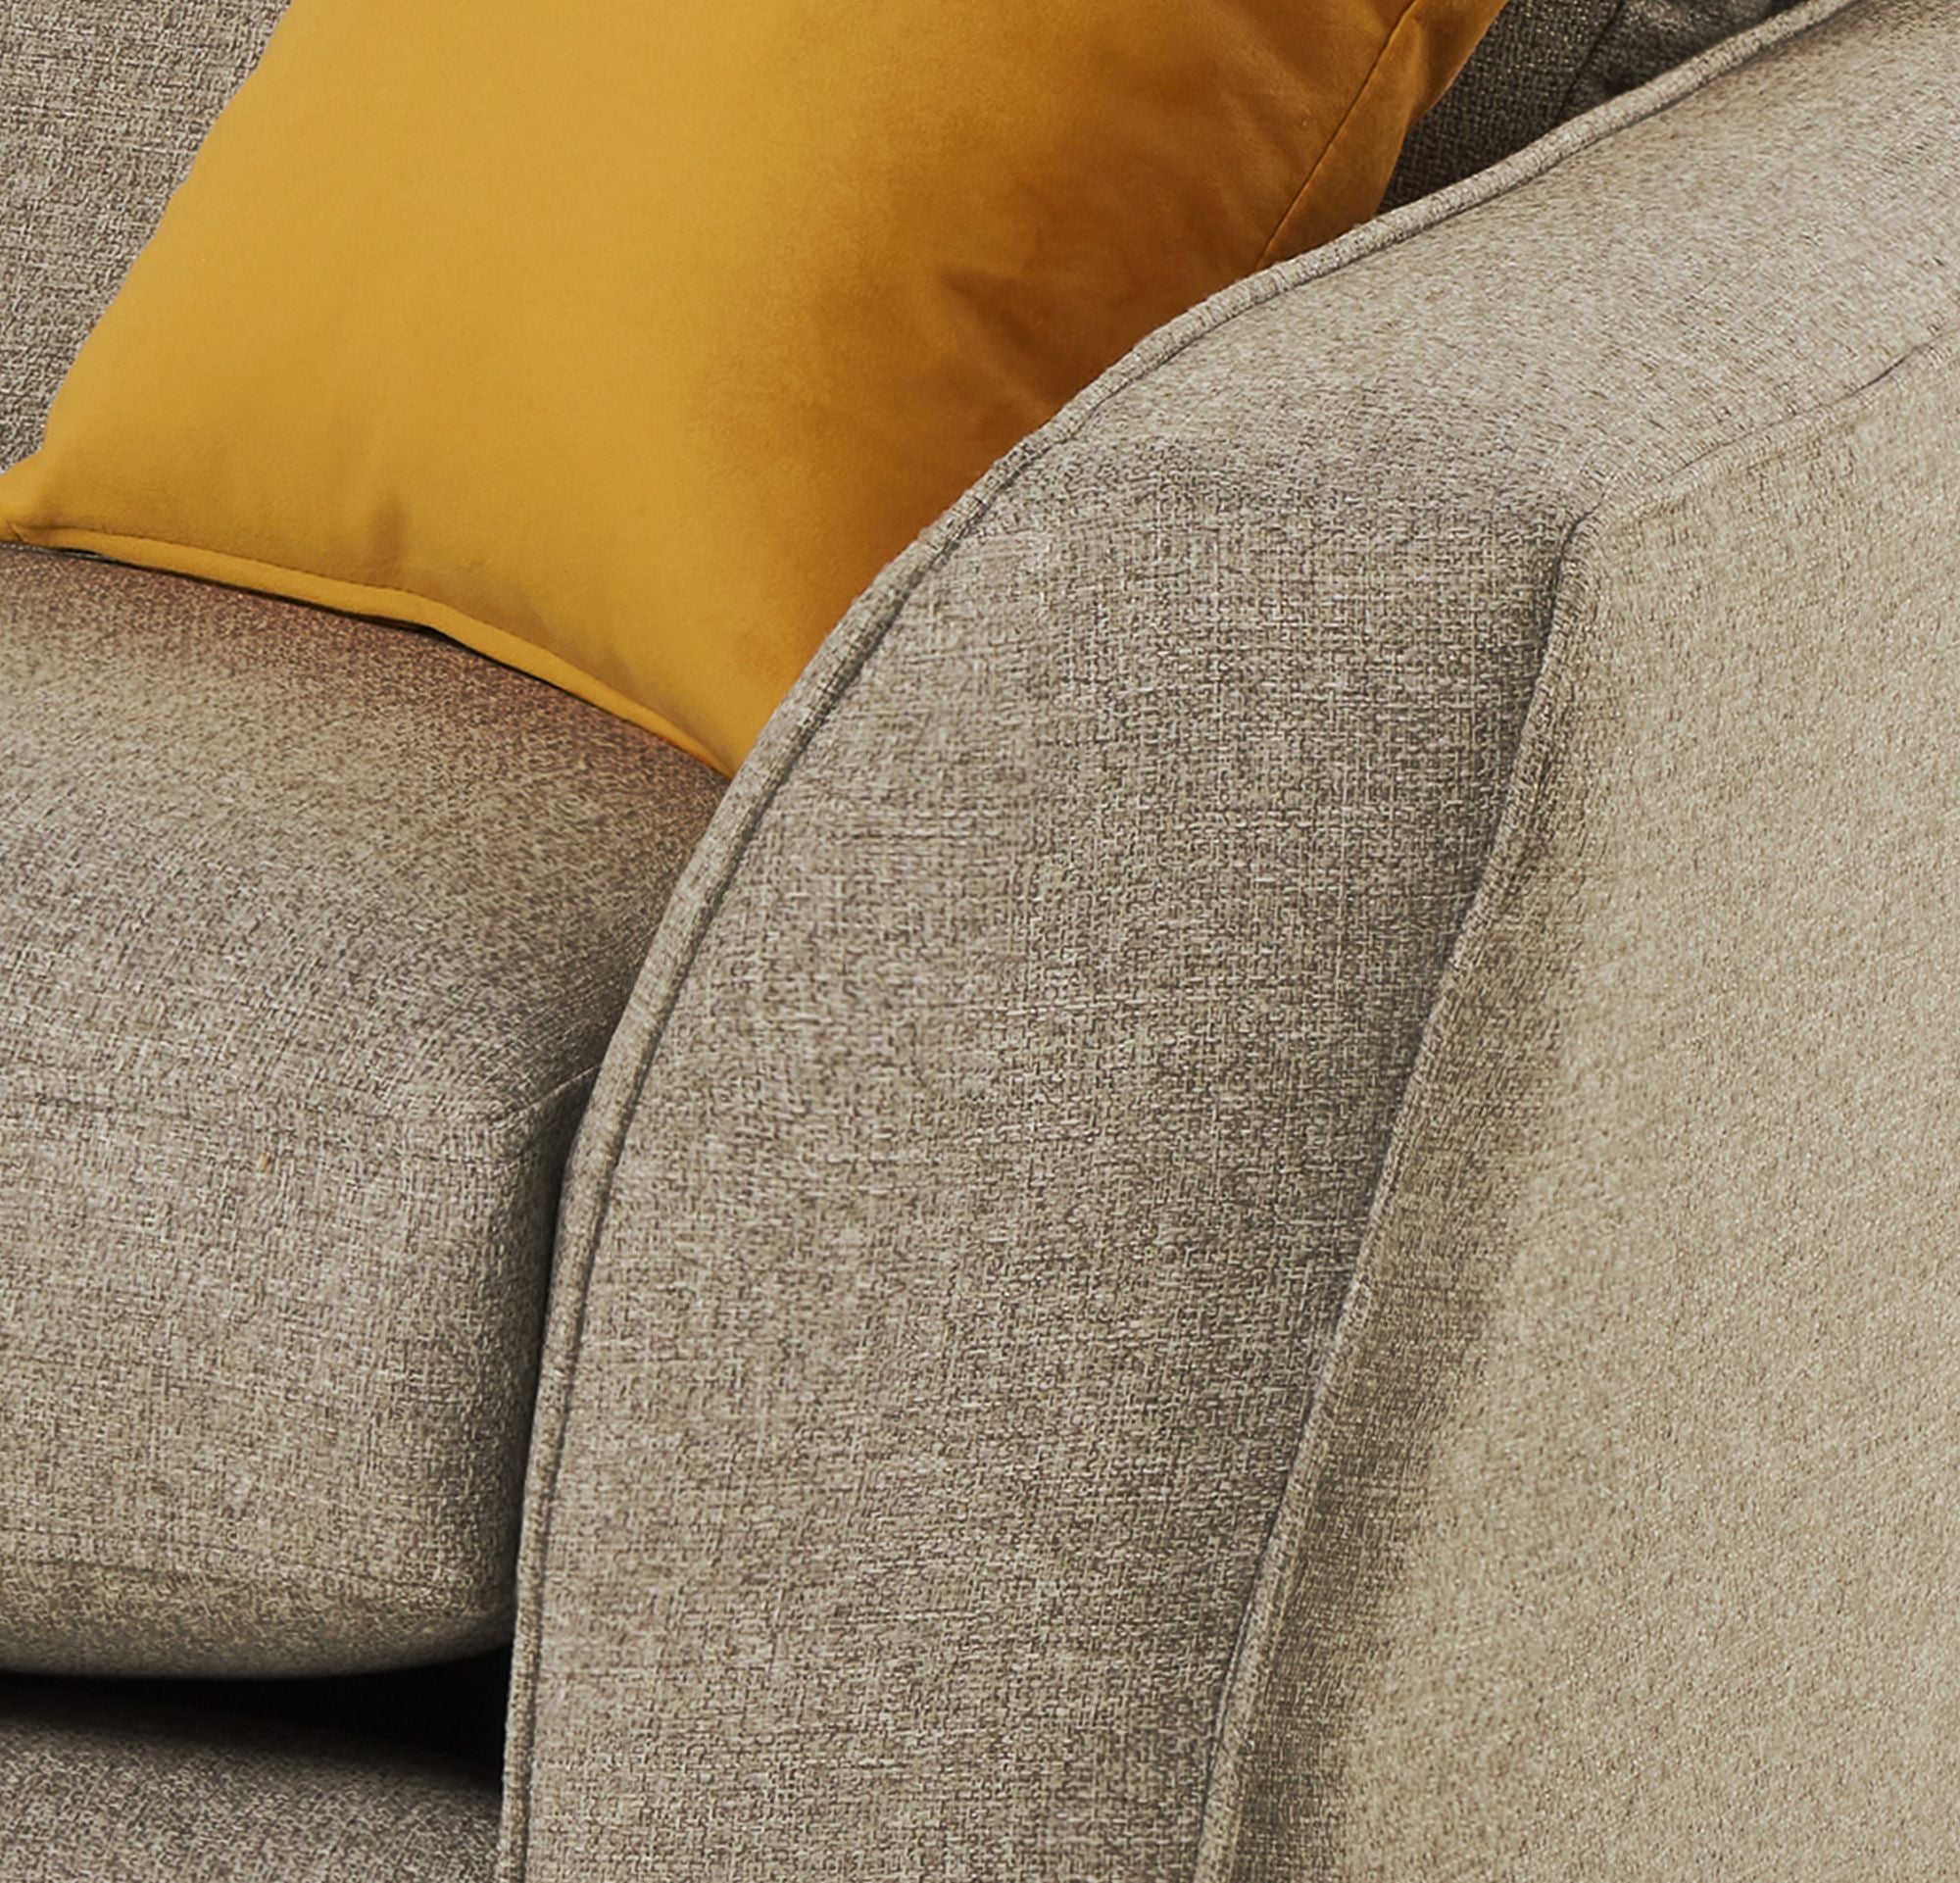 Libby sofa arm end in Oatmeal showing dual piping detail